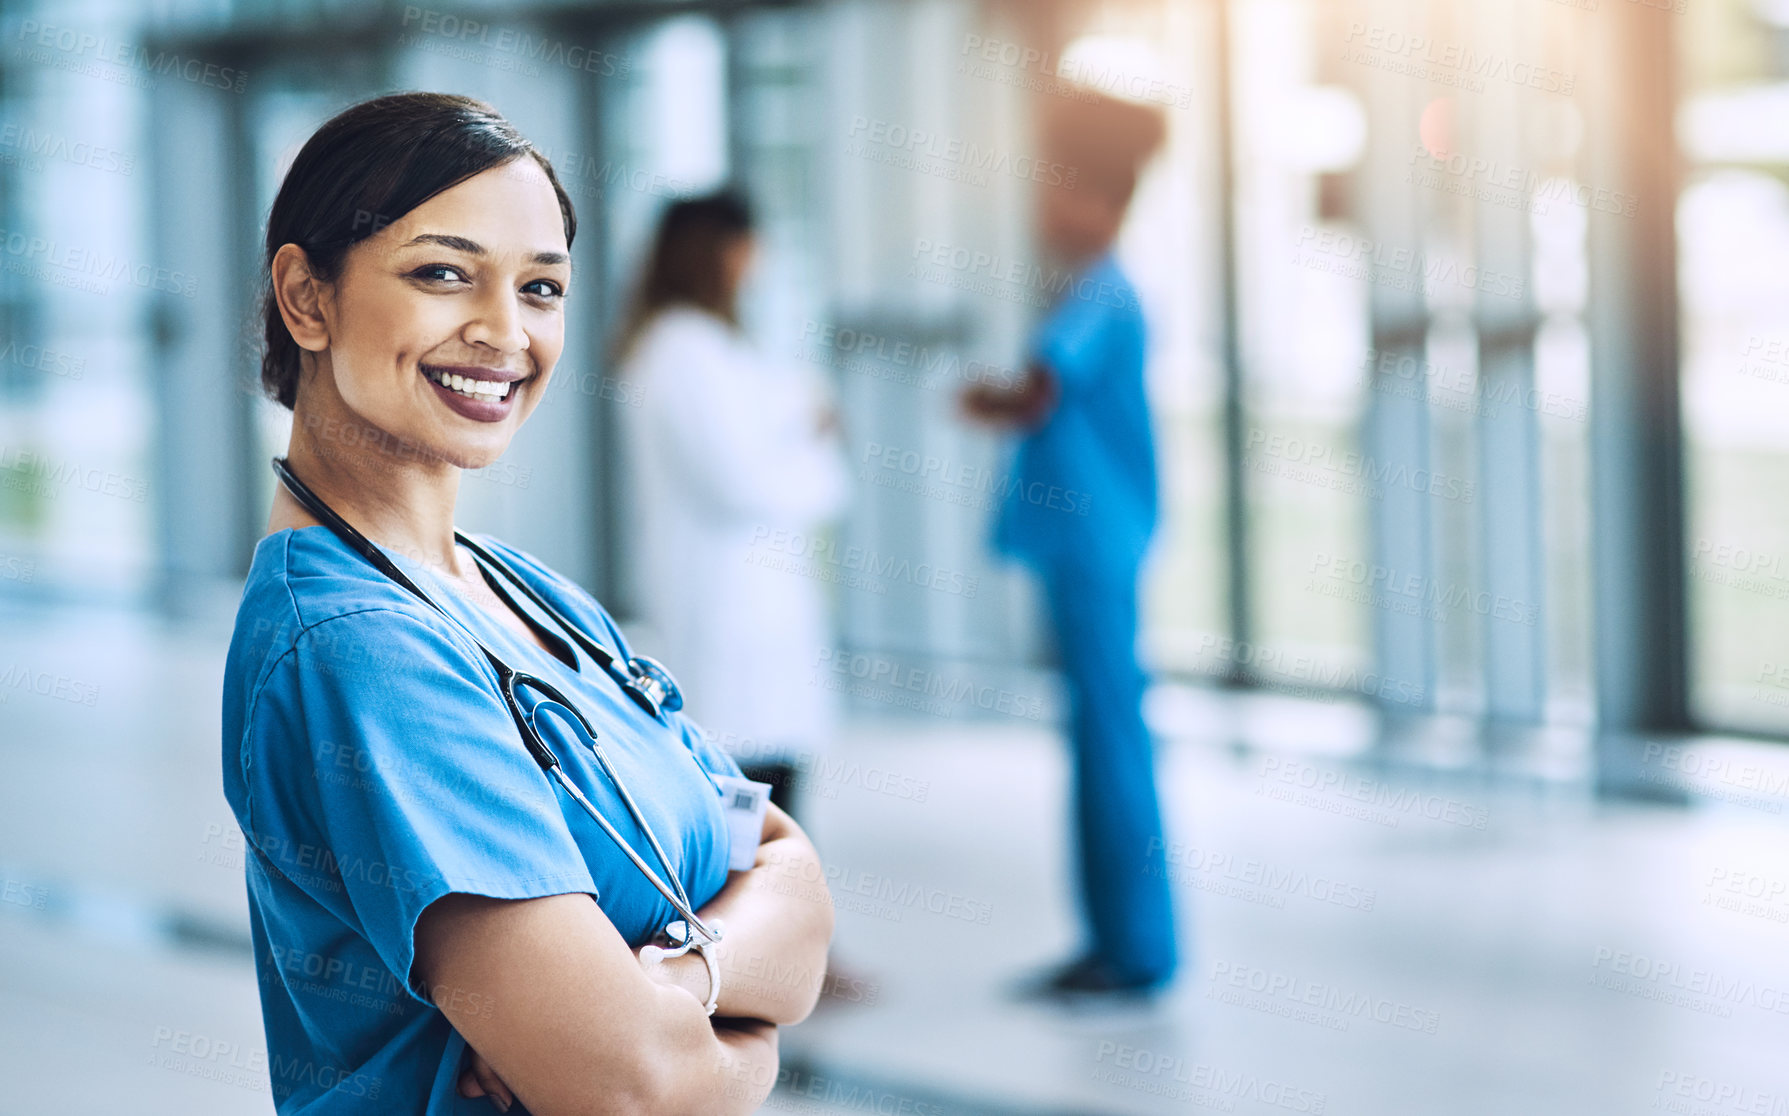 Buy stock photo Cropped shot of a female nurse standing in a hospital